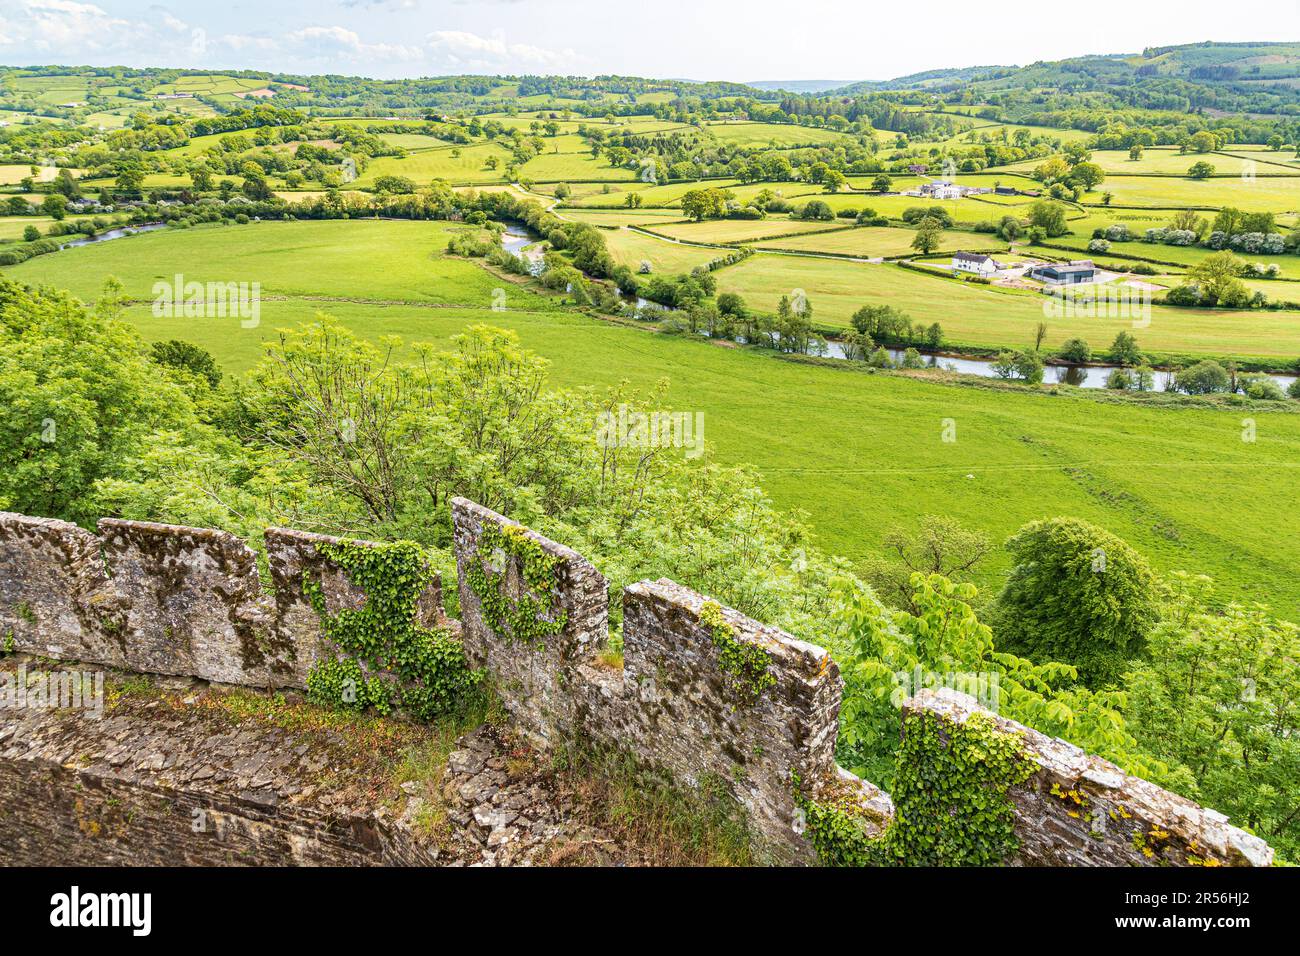 Looking out on the valley of the River Towy from the battlements of Dinefwr Castle (Dynevor Castle), Llandeilo, Carmarthenshire, south west Wales UK Stock Photo